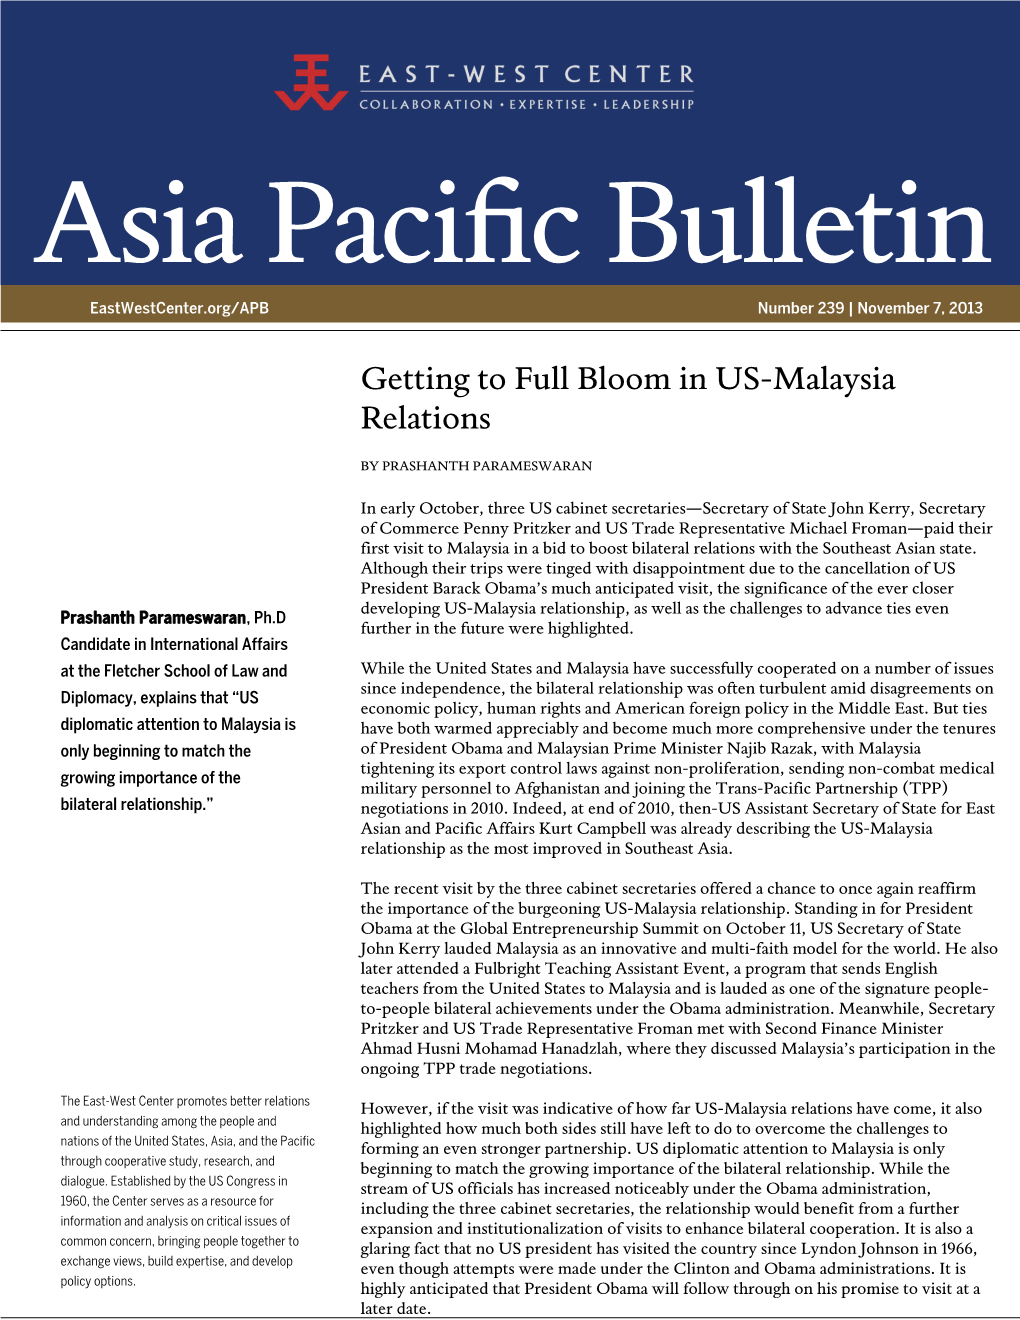 Getting to Full Bloom in US-Malaysia Relations